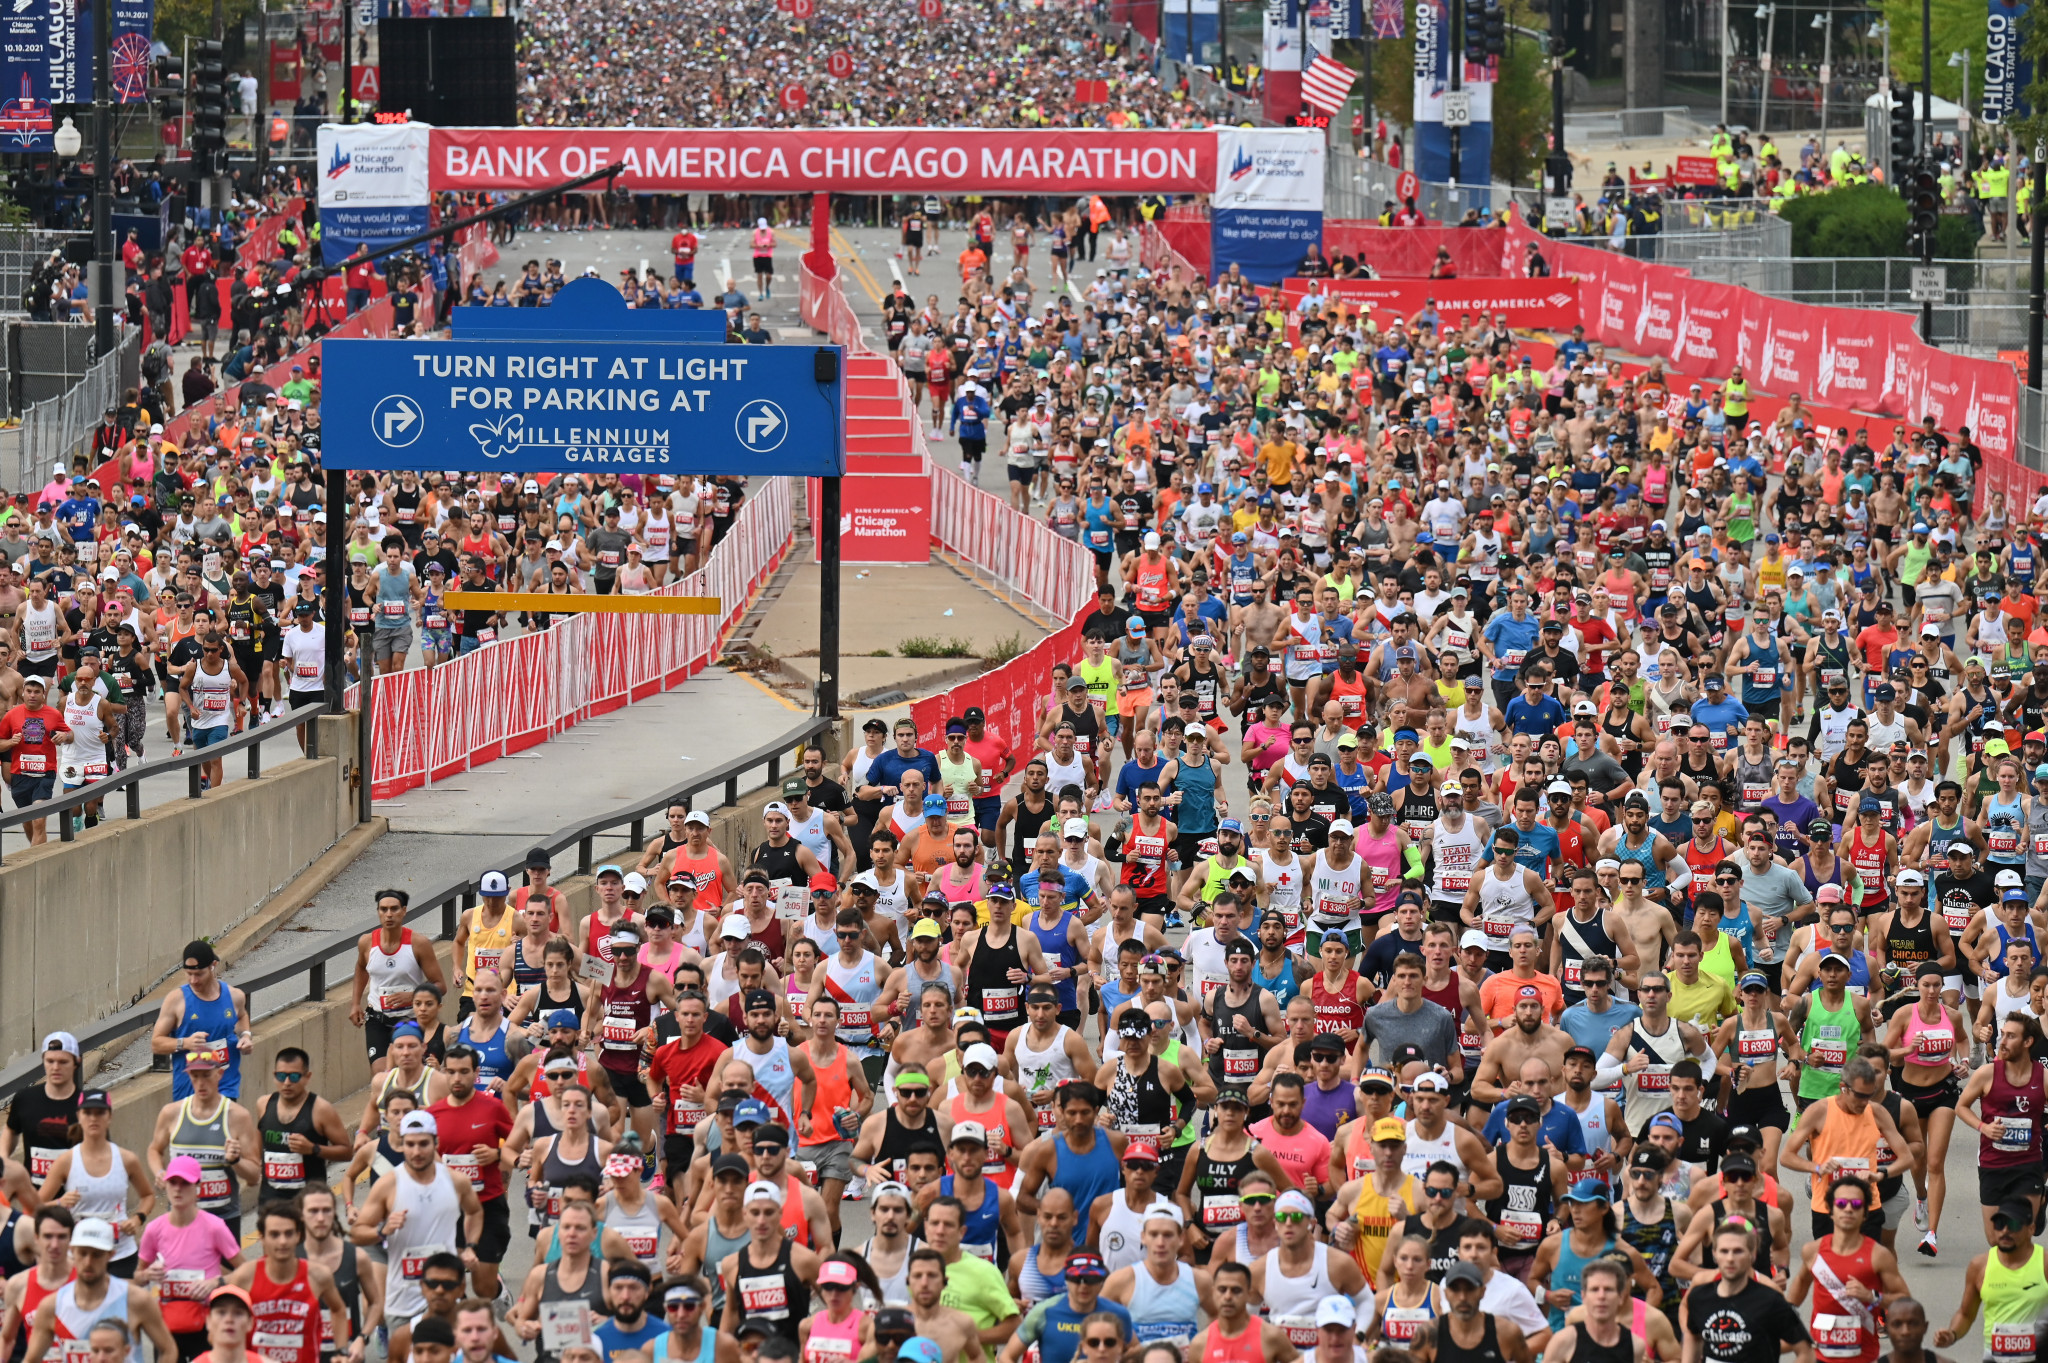 Unseasonably warm weather greeted the 33,000 runners as the Chicago Marathon returned after being cancelled last year because of the COVID-19 pandemic ©Getty Images